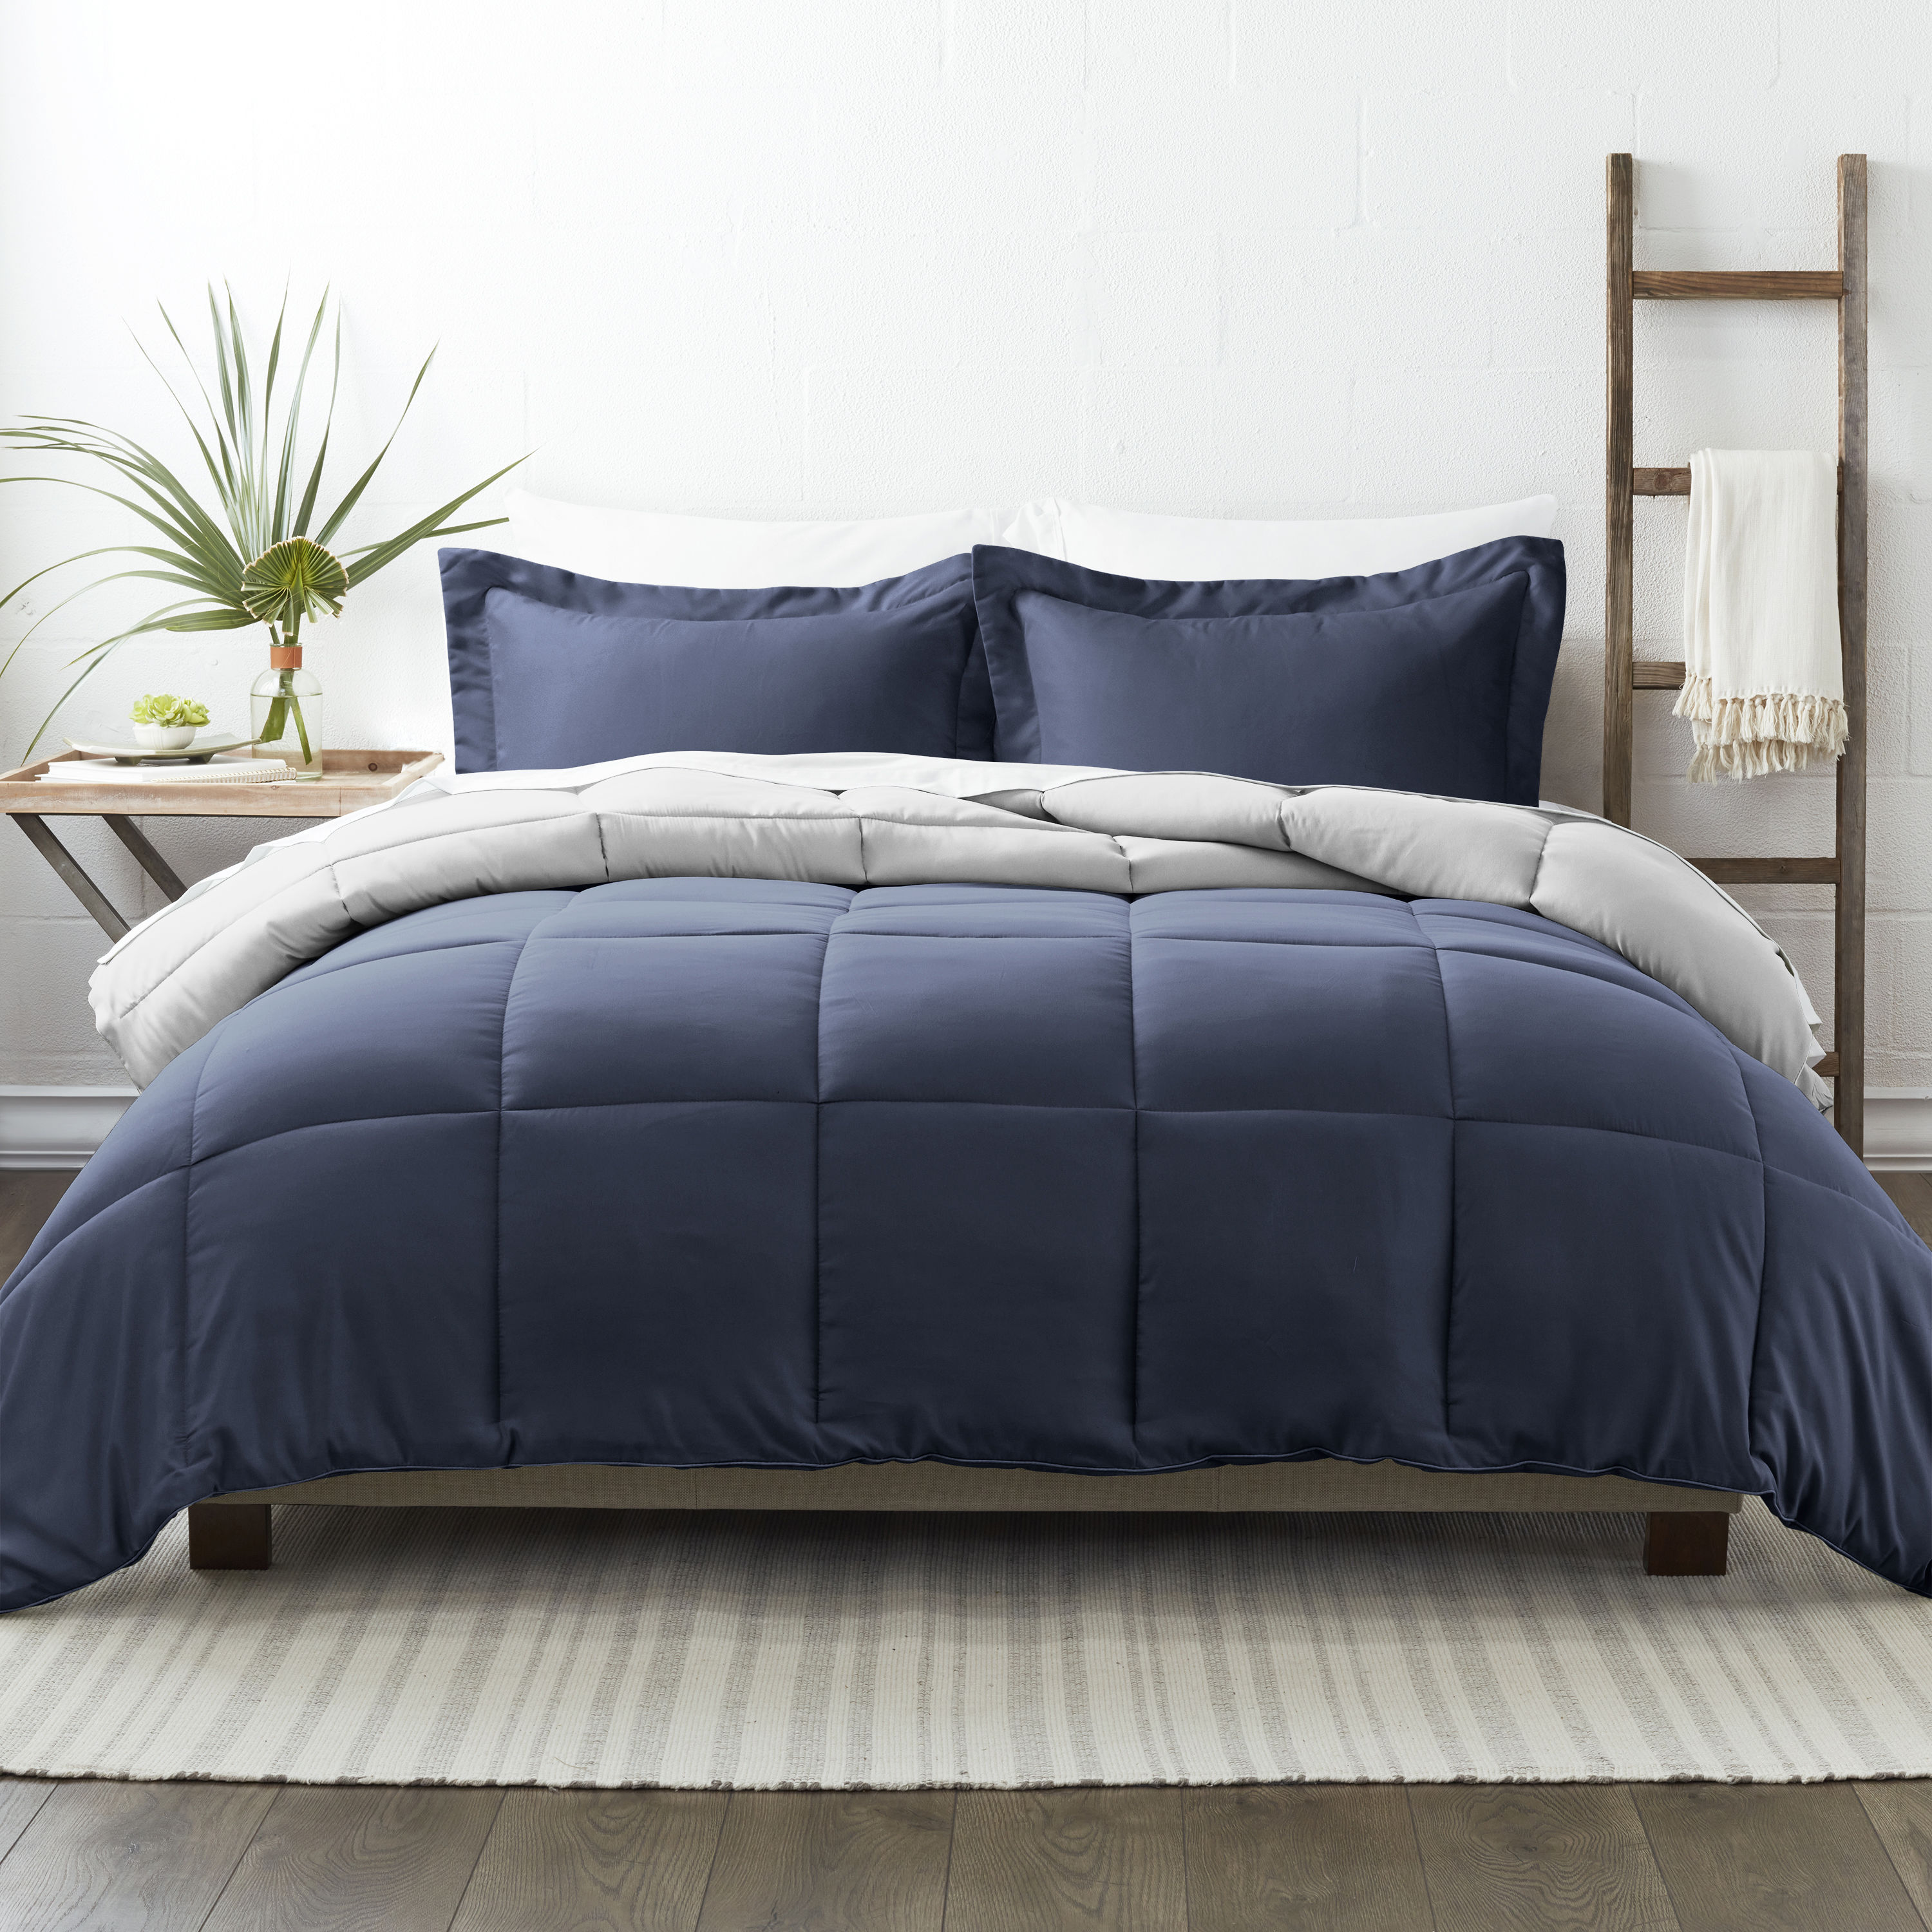 s Best-selling Duvet Is 56% Off Right Now